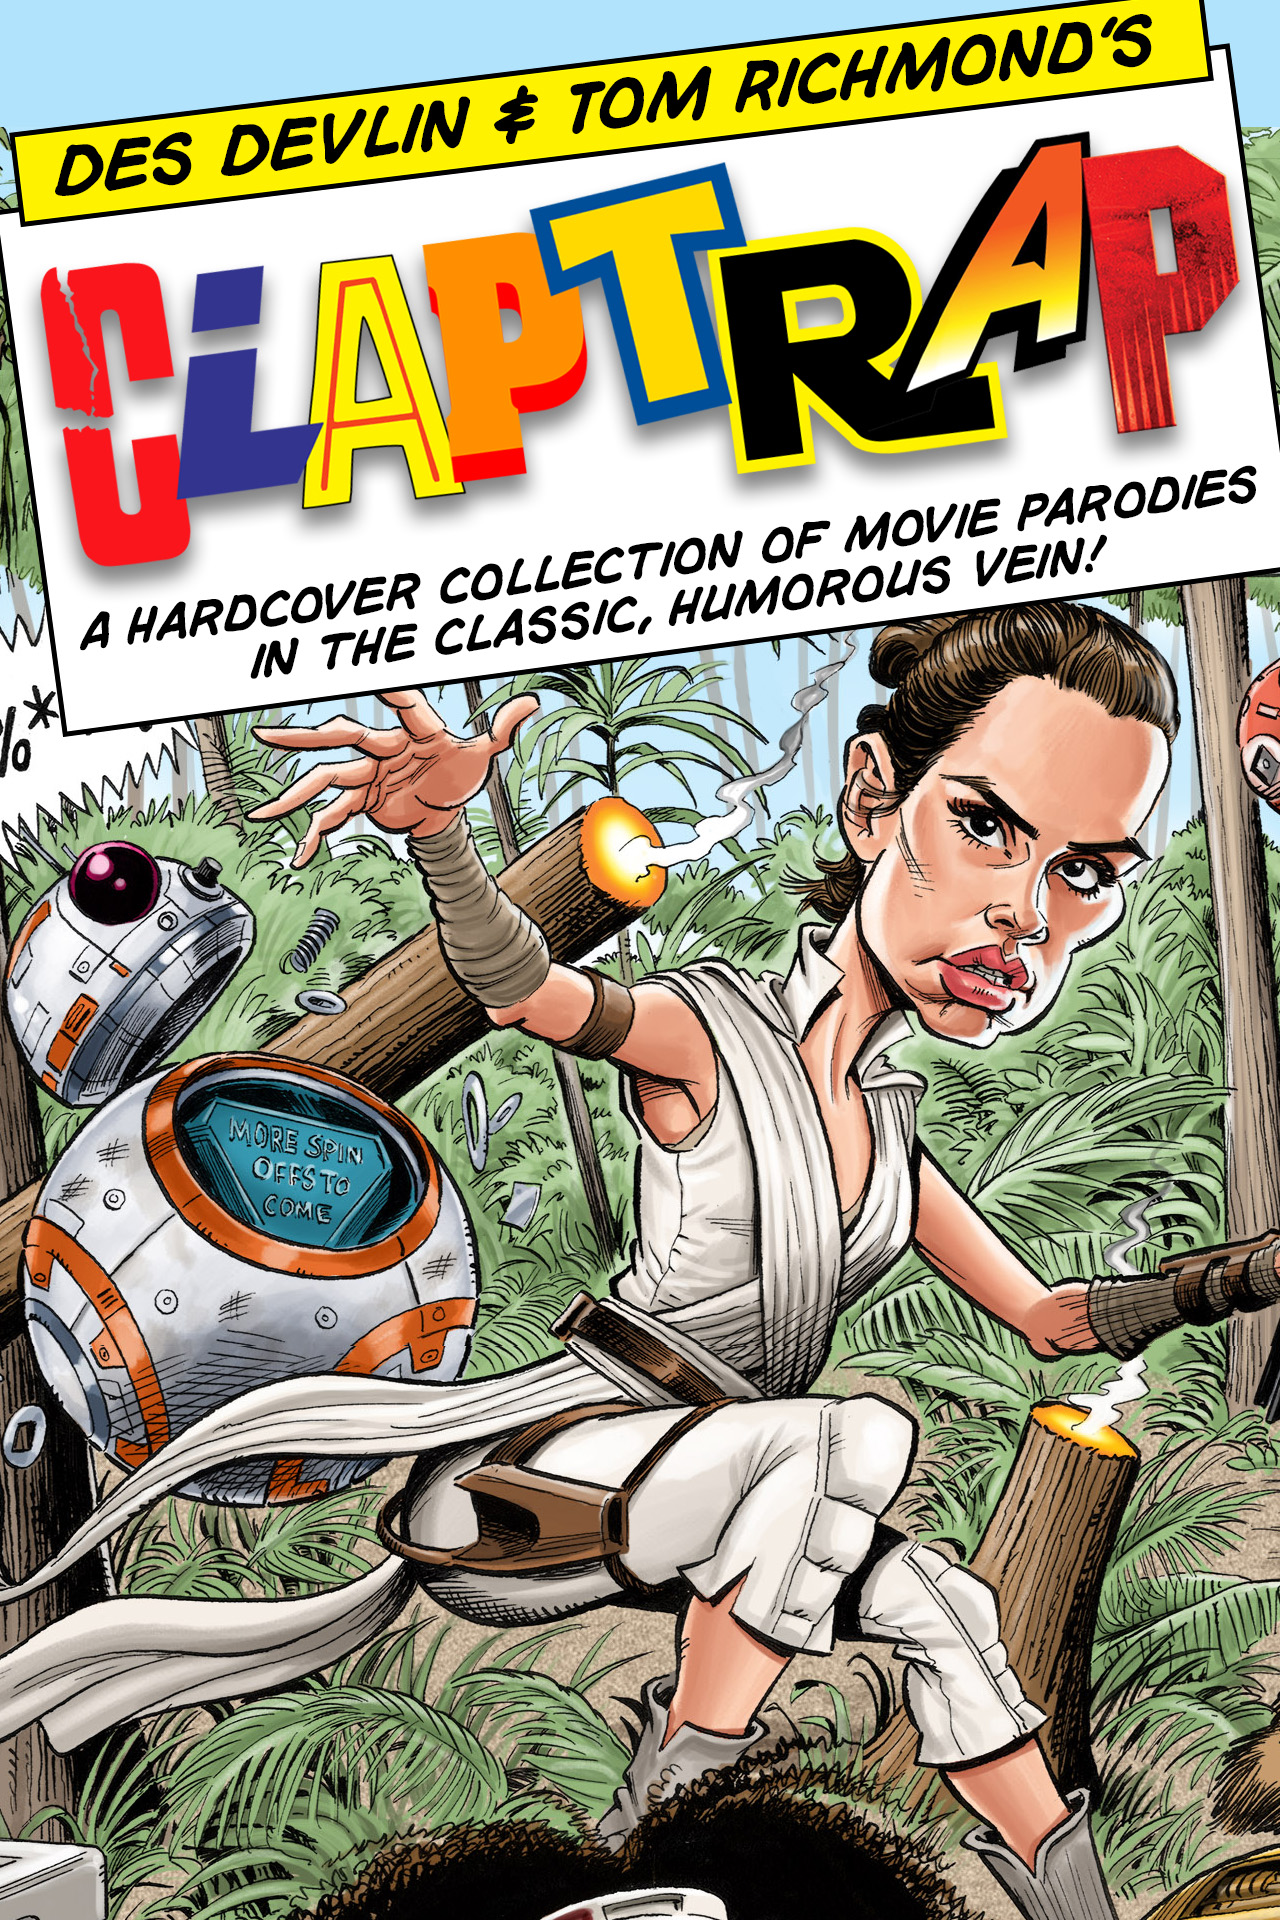 CLAPTRAP: Movie spoofs in a classic humorous vein!